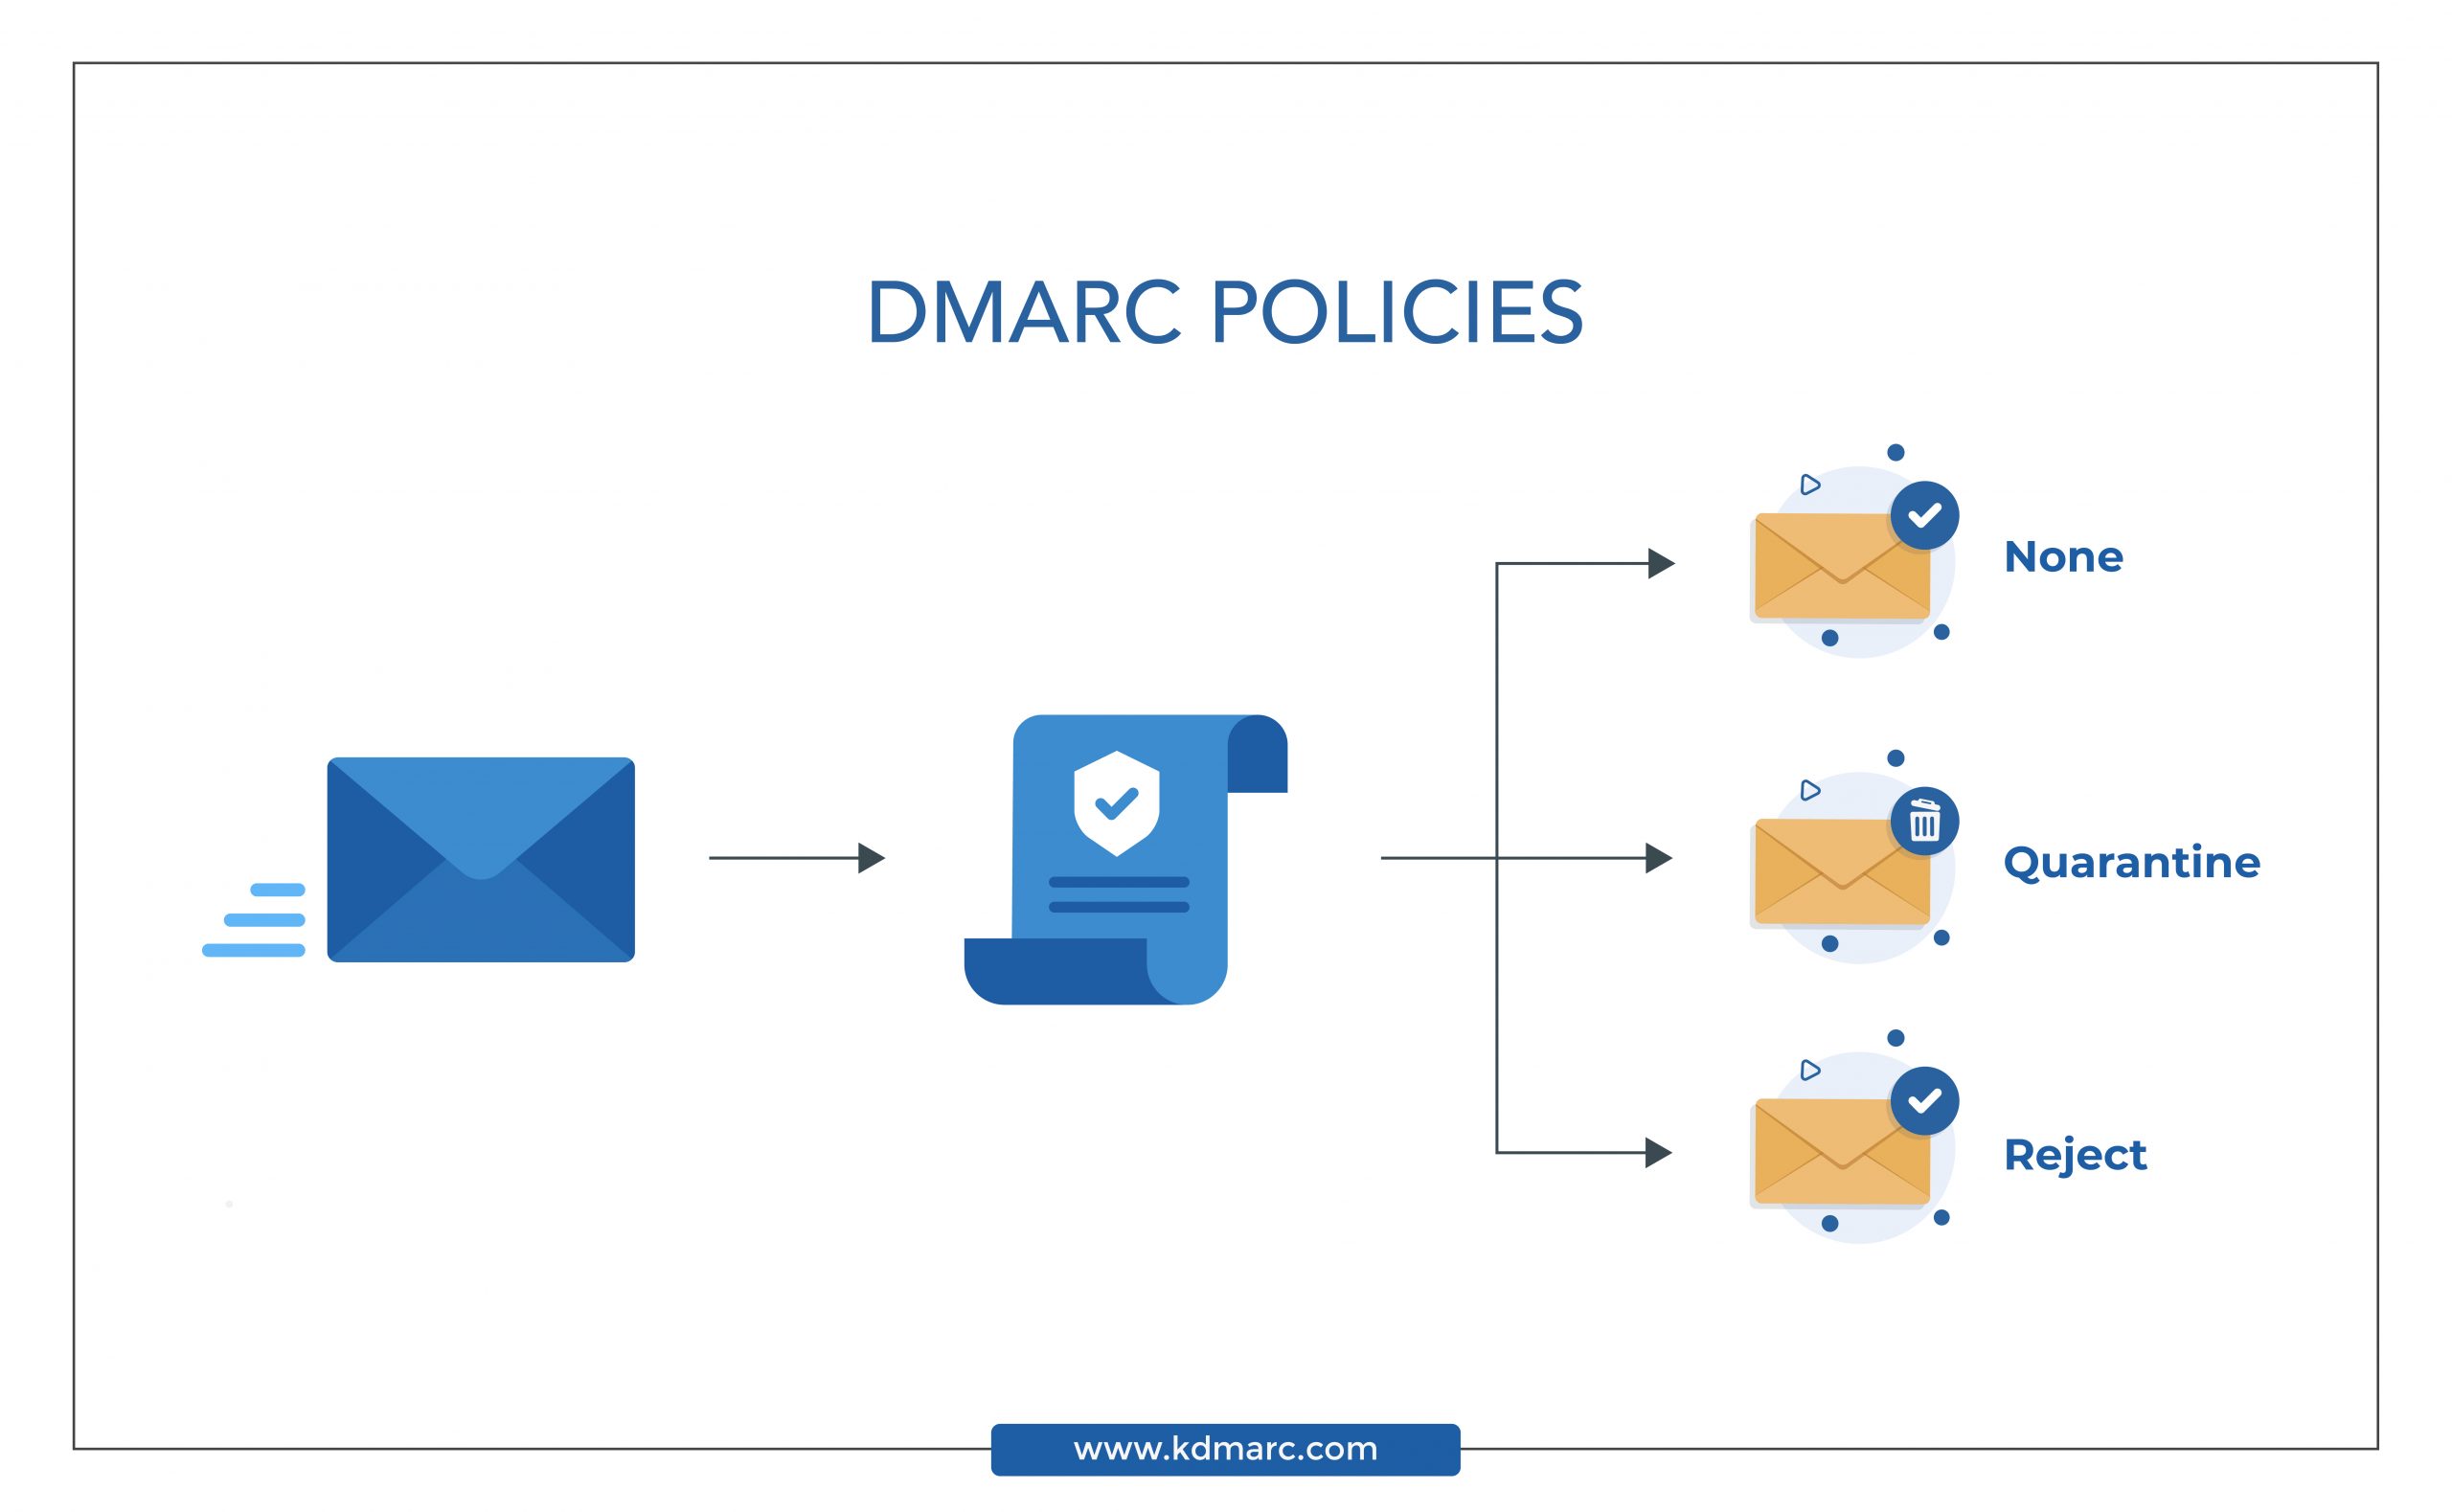 Different Types of DMARC Policies